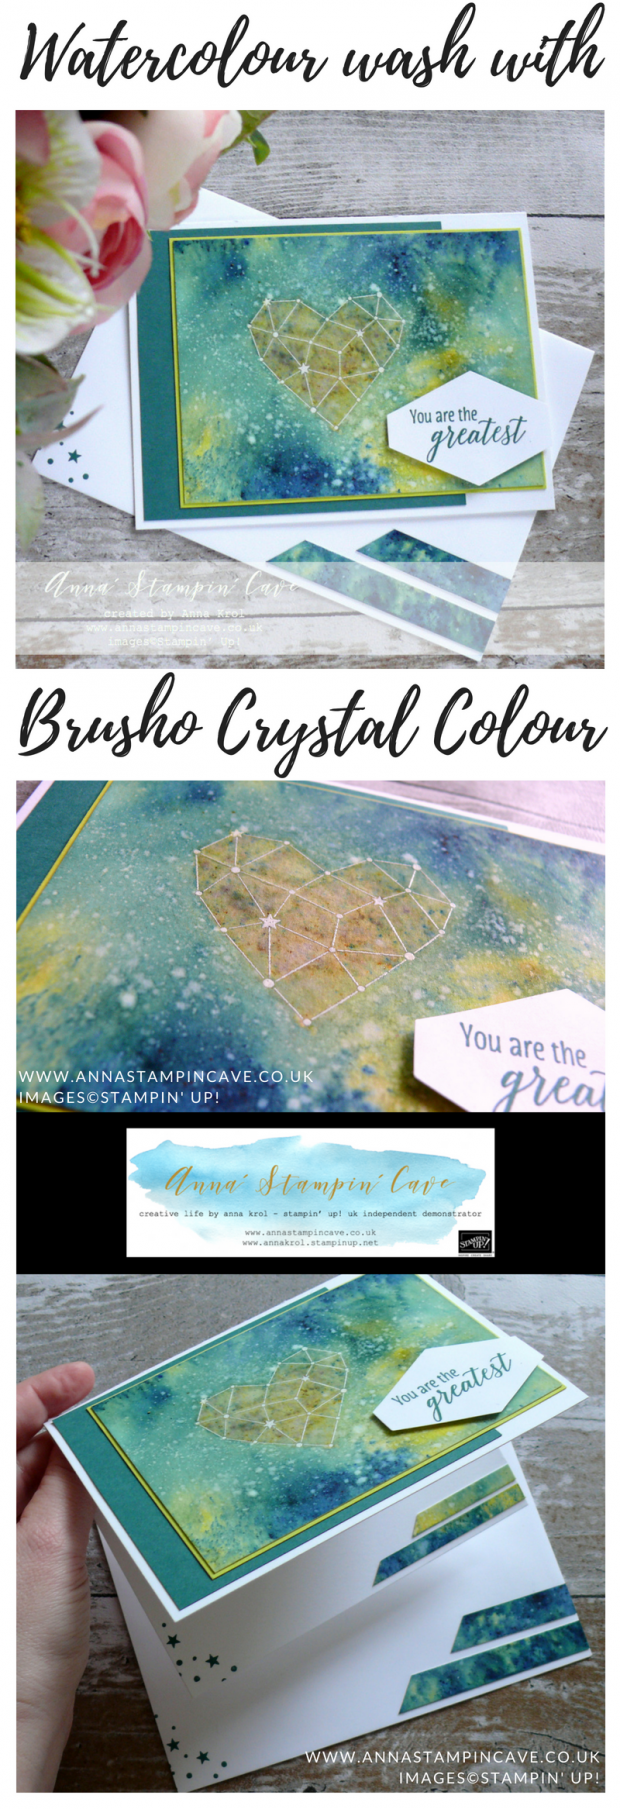 Anna' Stampin' Cave - Teachers Thank You Card with Watercolour Wash using Brusho Crystal Colour, Little Twinkle Stamp Set & Tropical Chic Stamp Set from Stampin' Up!